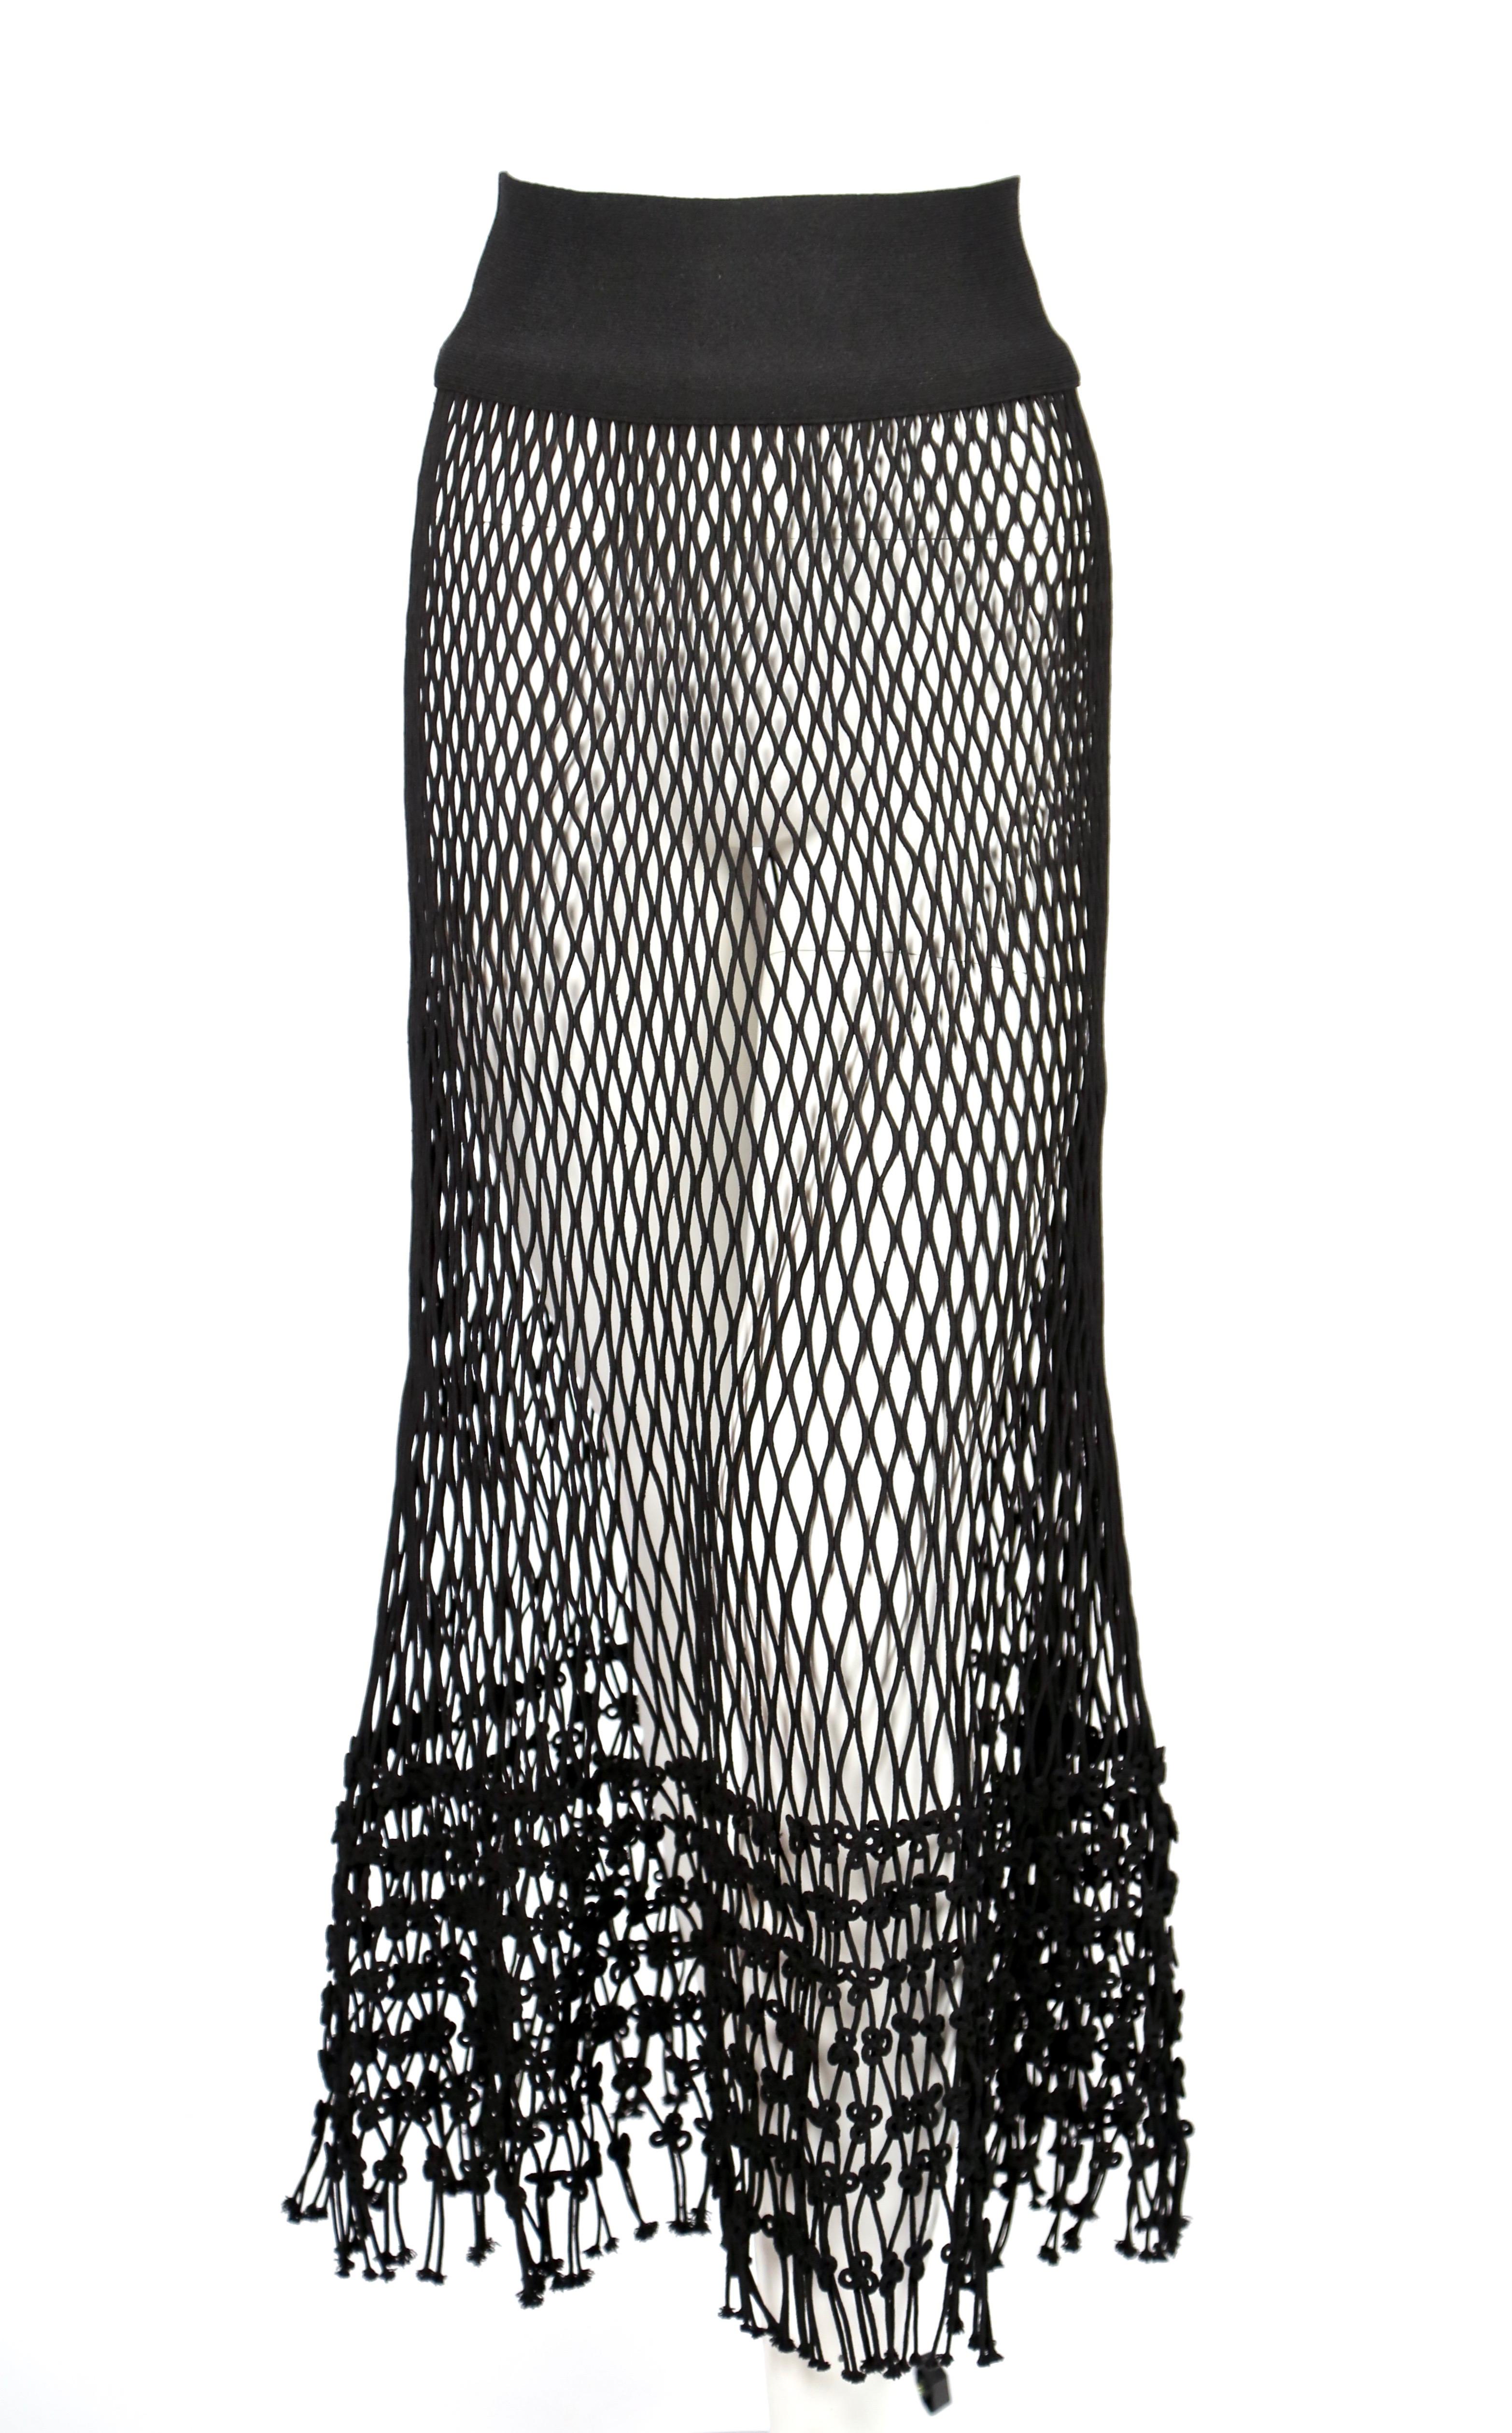 Jet-black, net skirt designed by Phoebe Philo for Celine exactly as seen on the spring 2014 runway and featured in the spring ad campaign. French size S. Approximate measurements (unstretched): waist 26